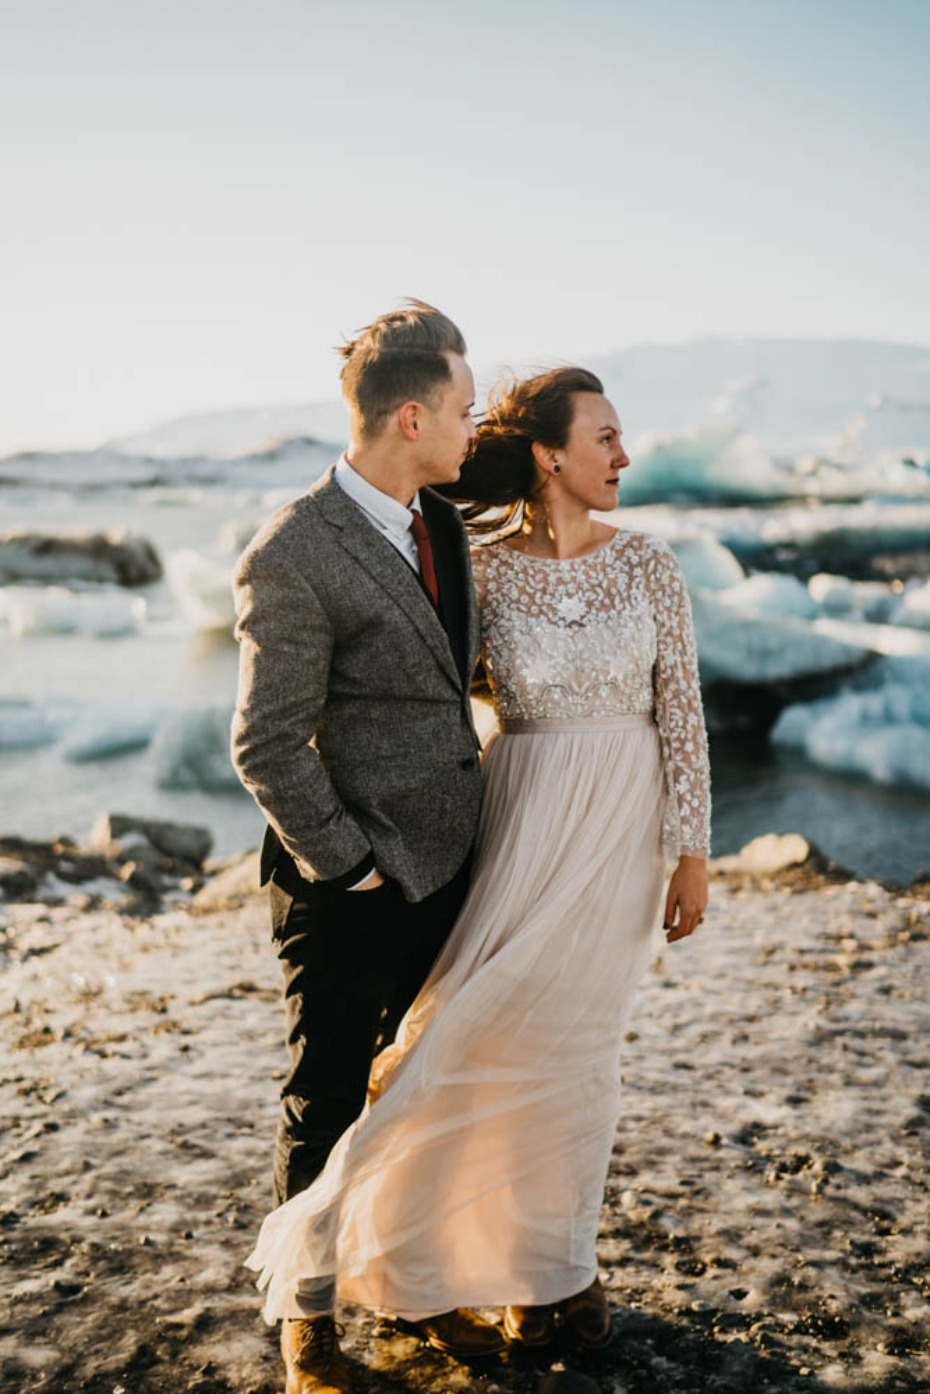 Beautiful elopement in Iceland